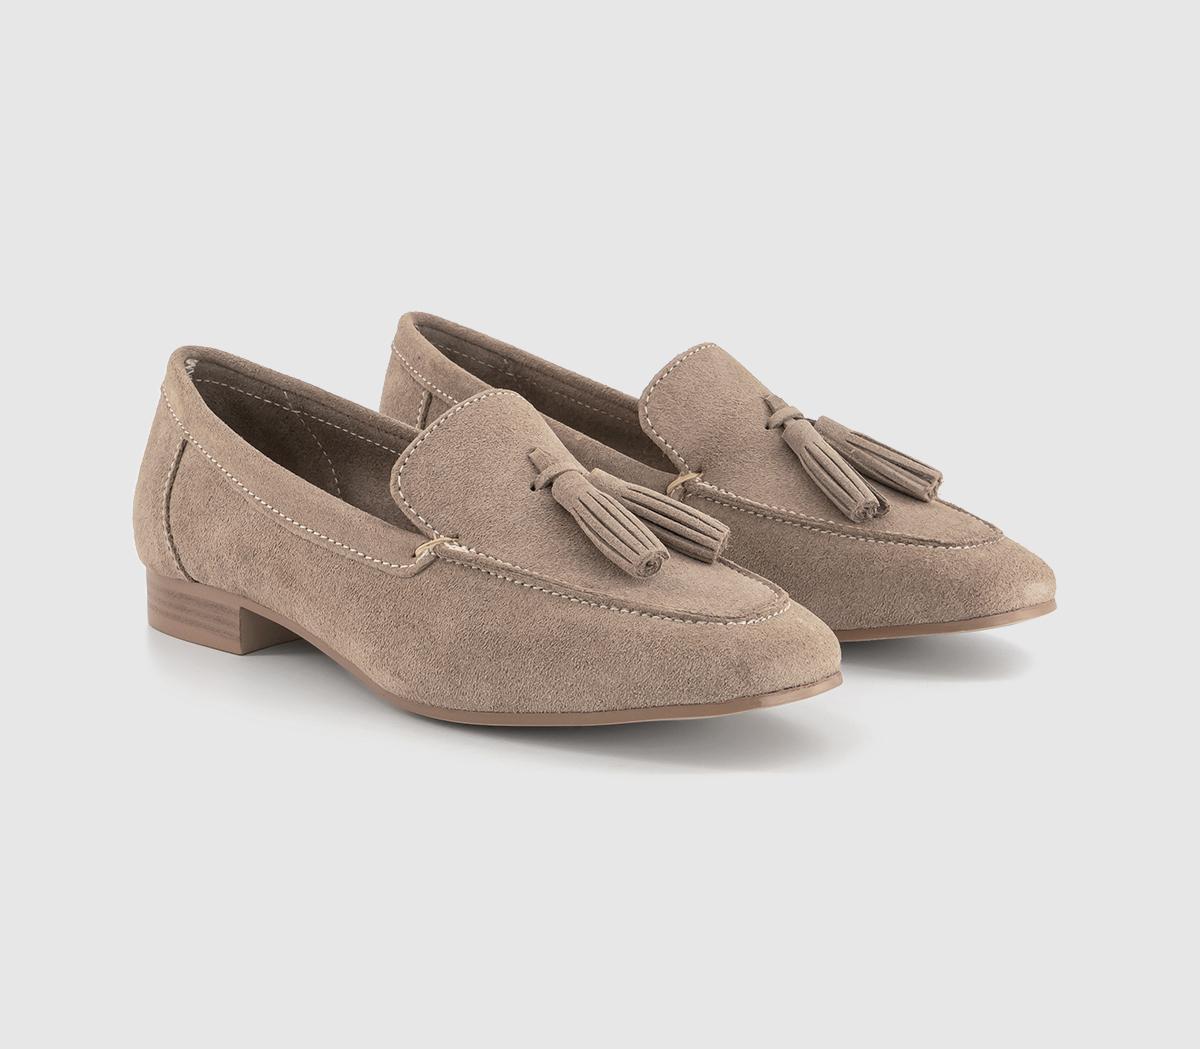 OFFICE Womens Fond Tassel Loafers Taupe Suede, 6